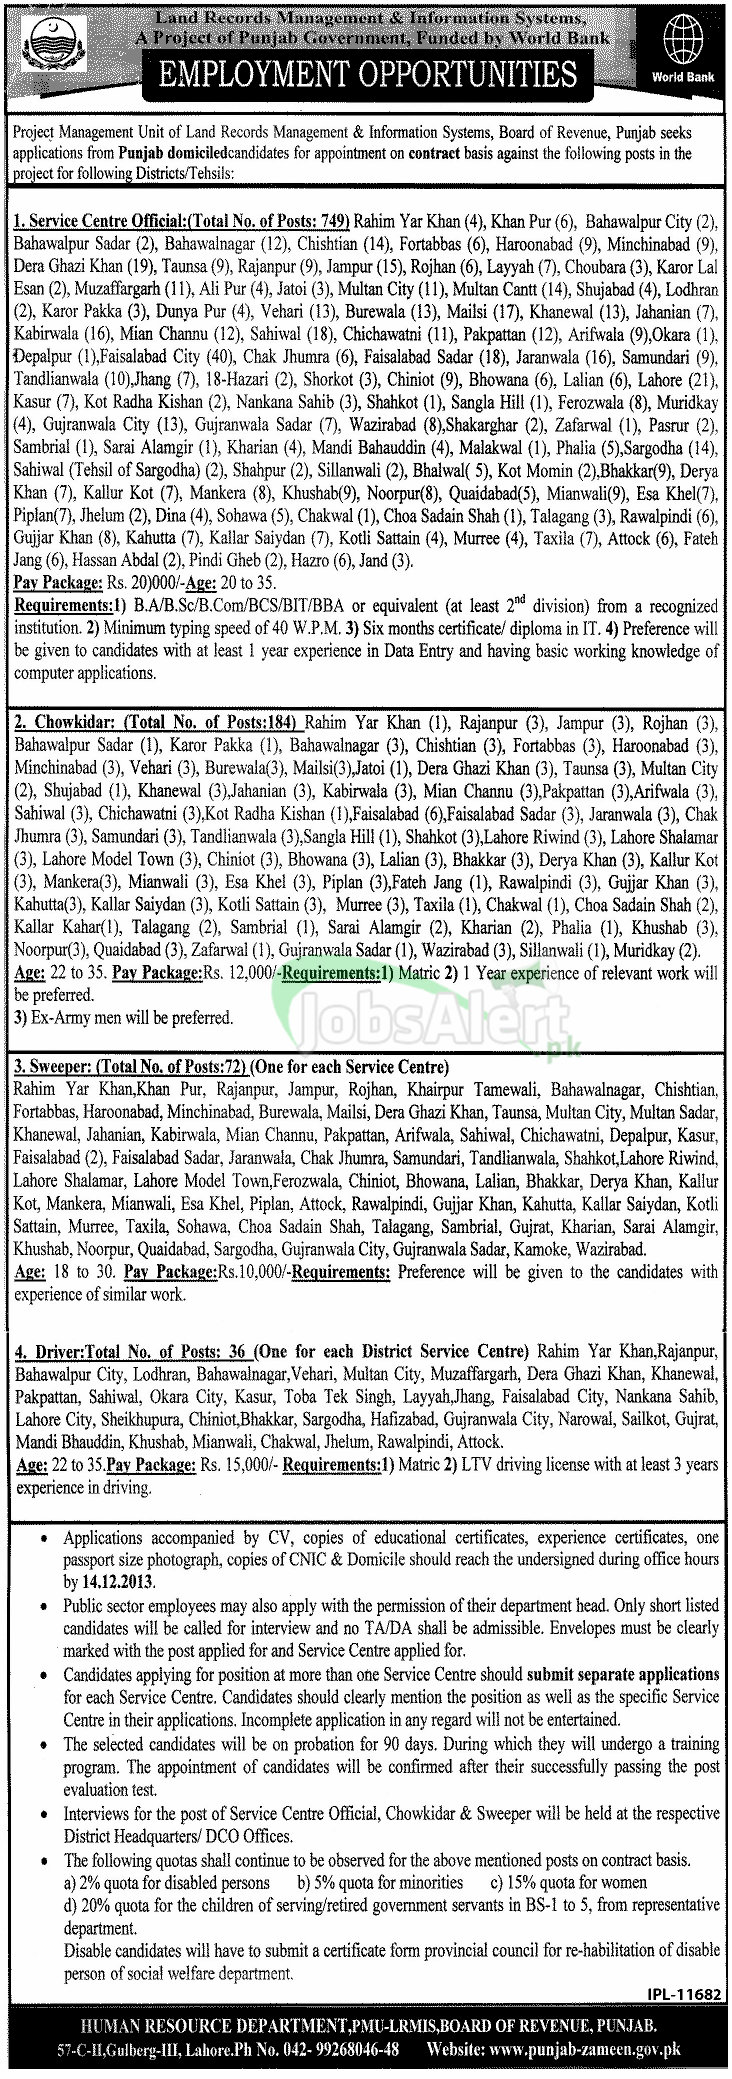 Service Centre Official Jobs in Project Management Unit Board of Revenue